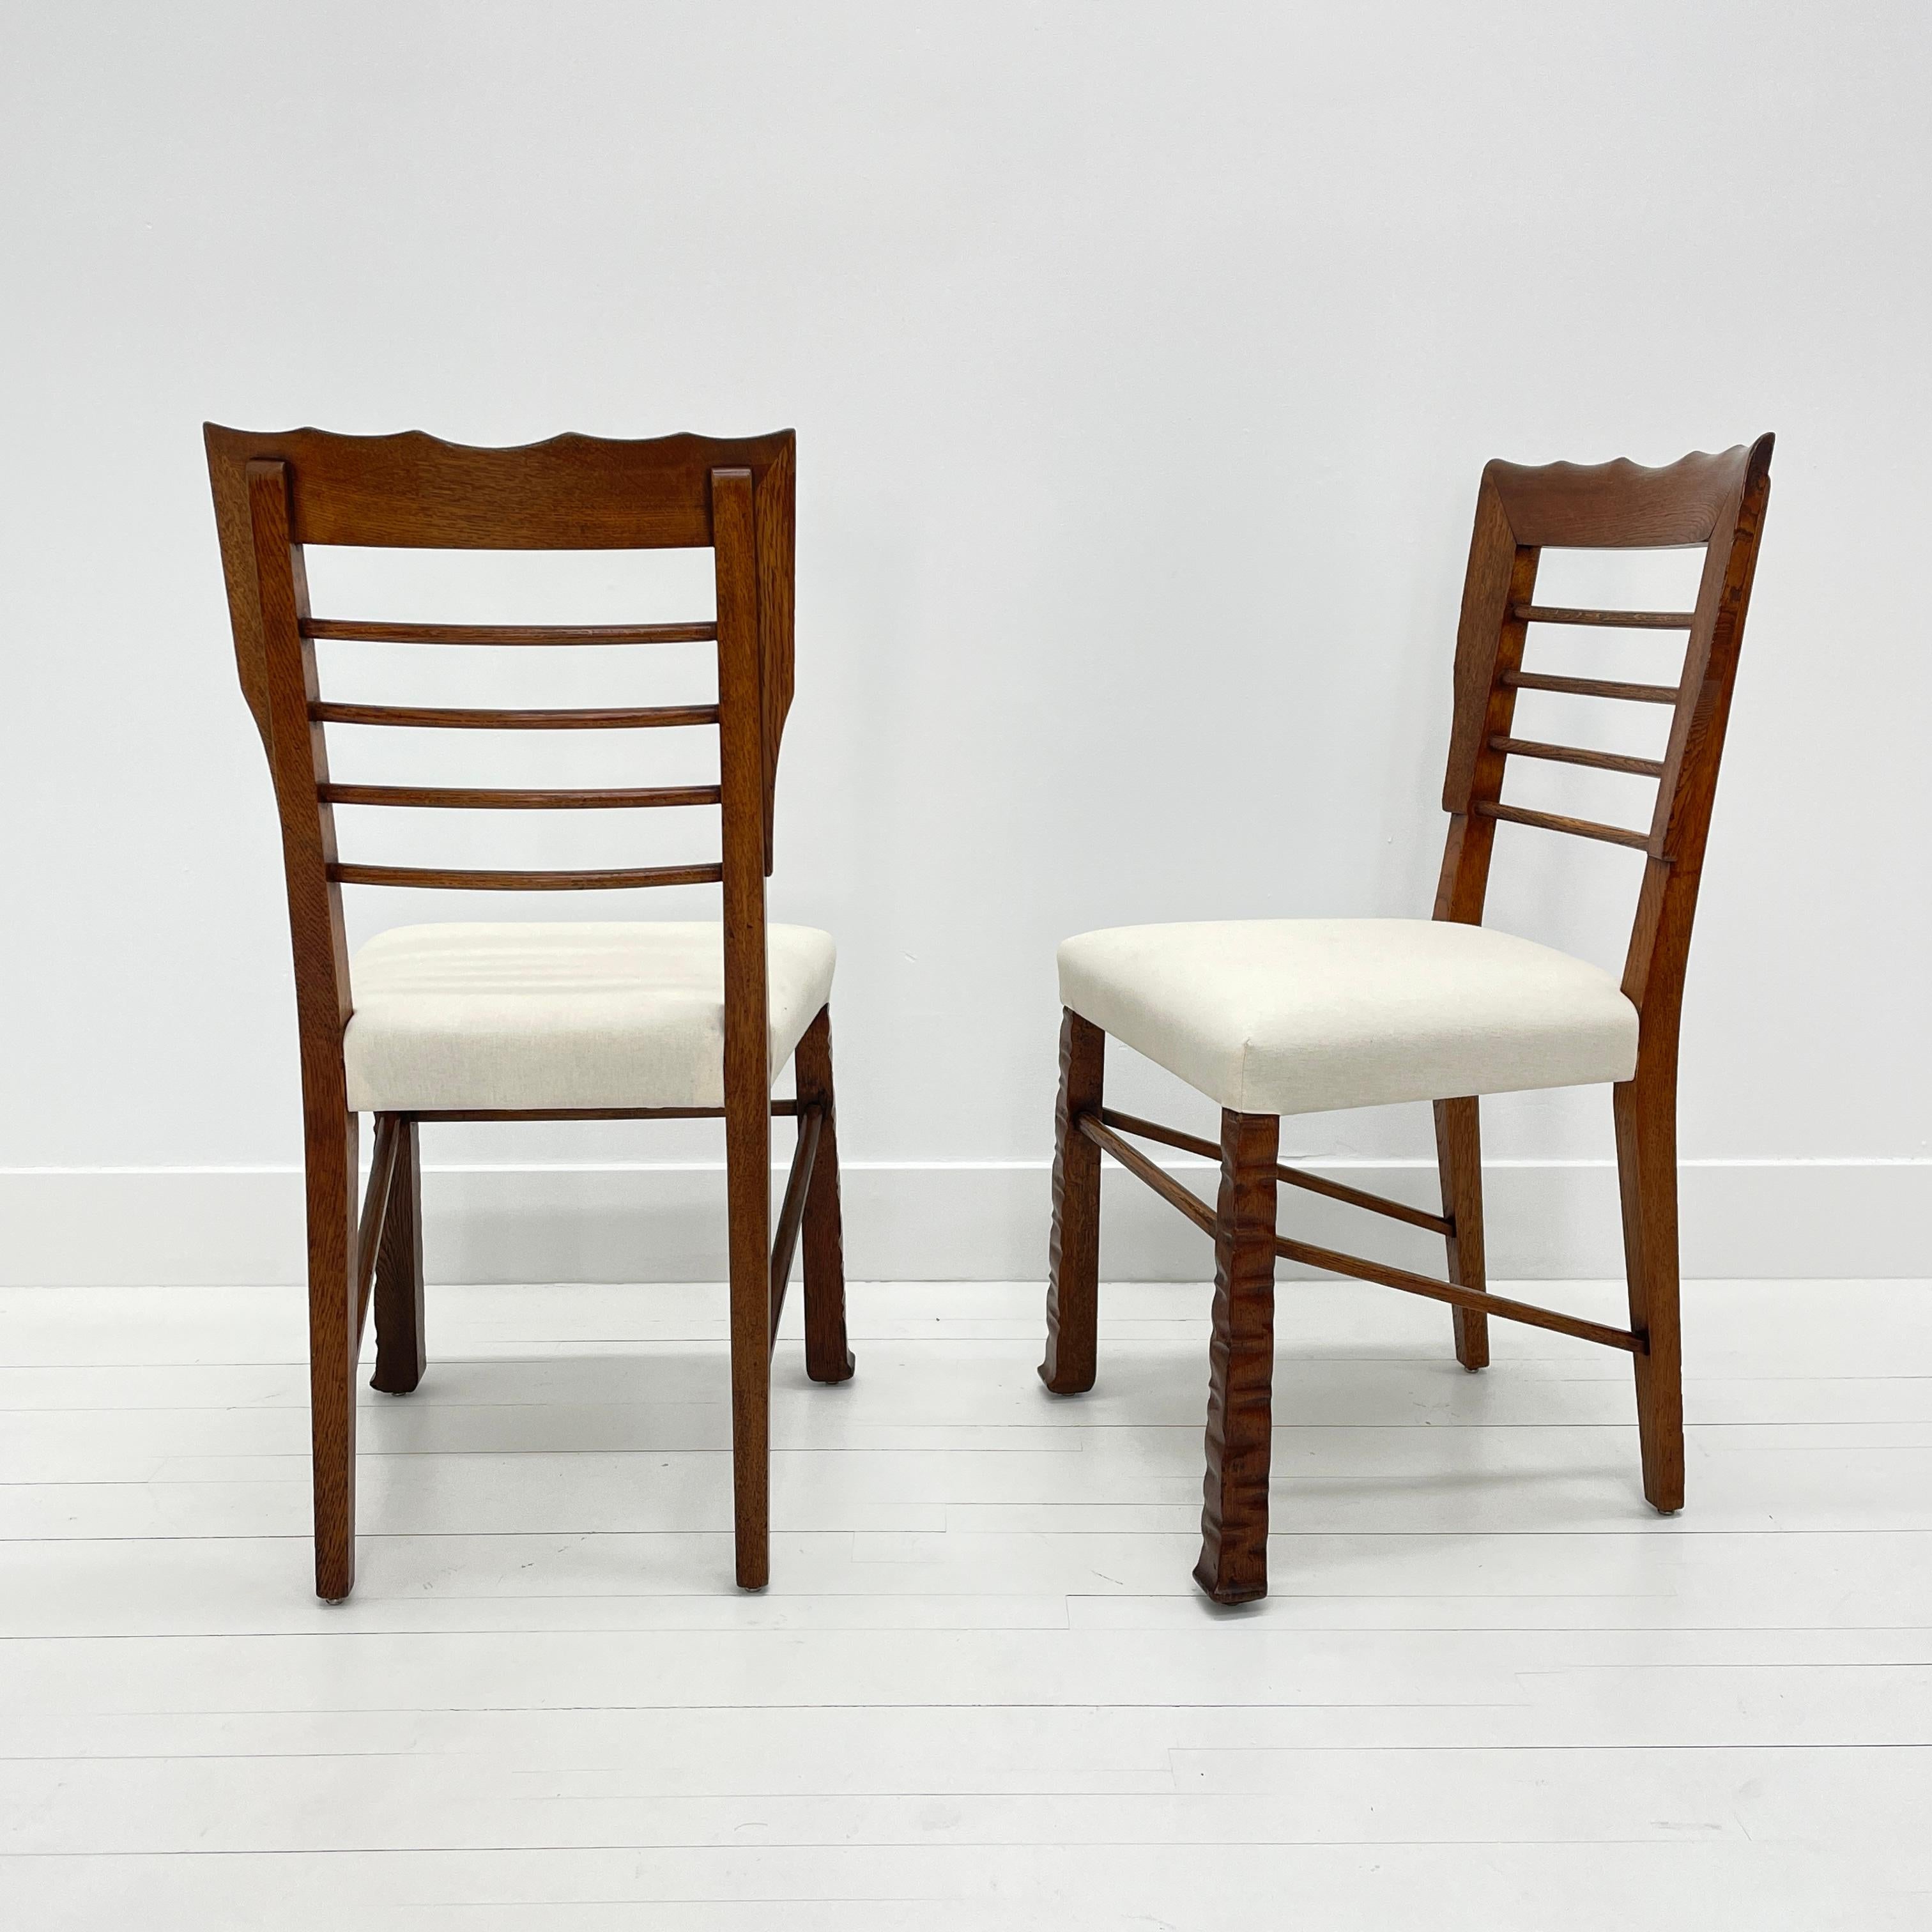 Rustic Scalloped Edge Dining Chairs, Set of 10, Italy, 1940's For Sale 9